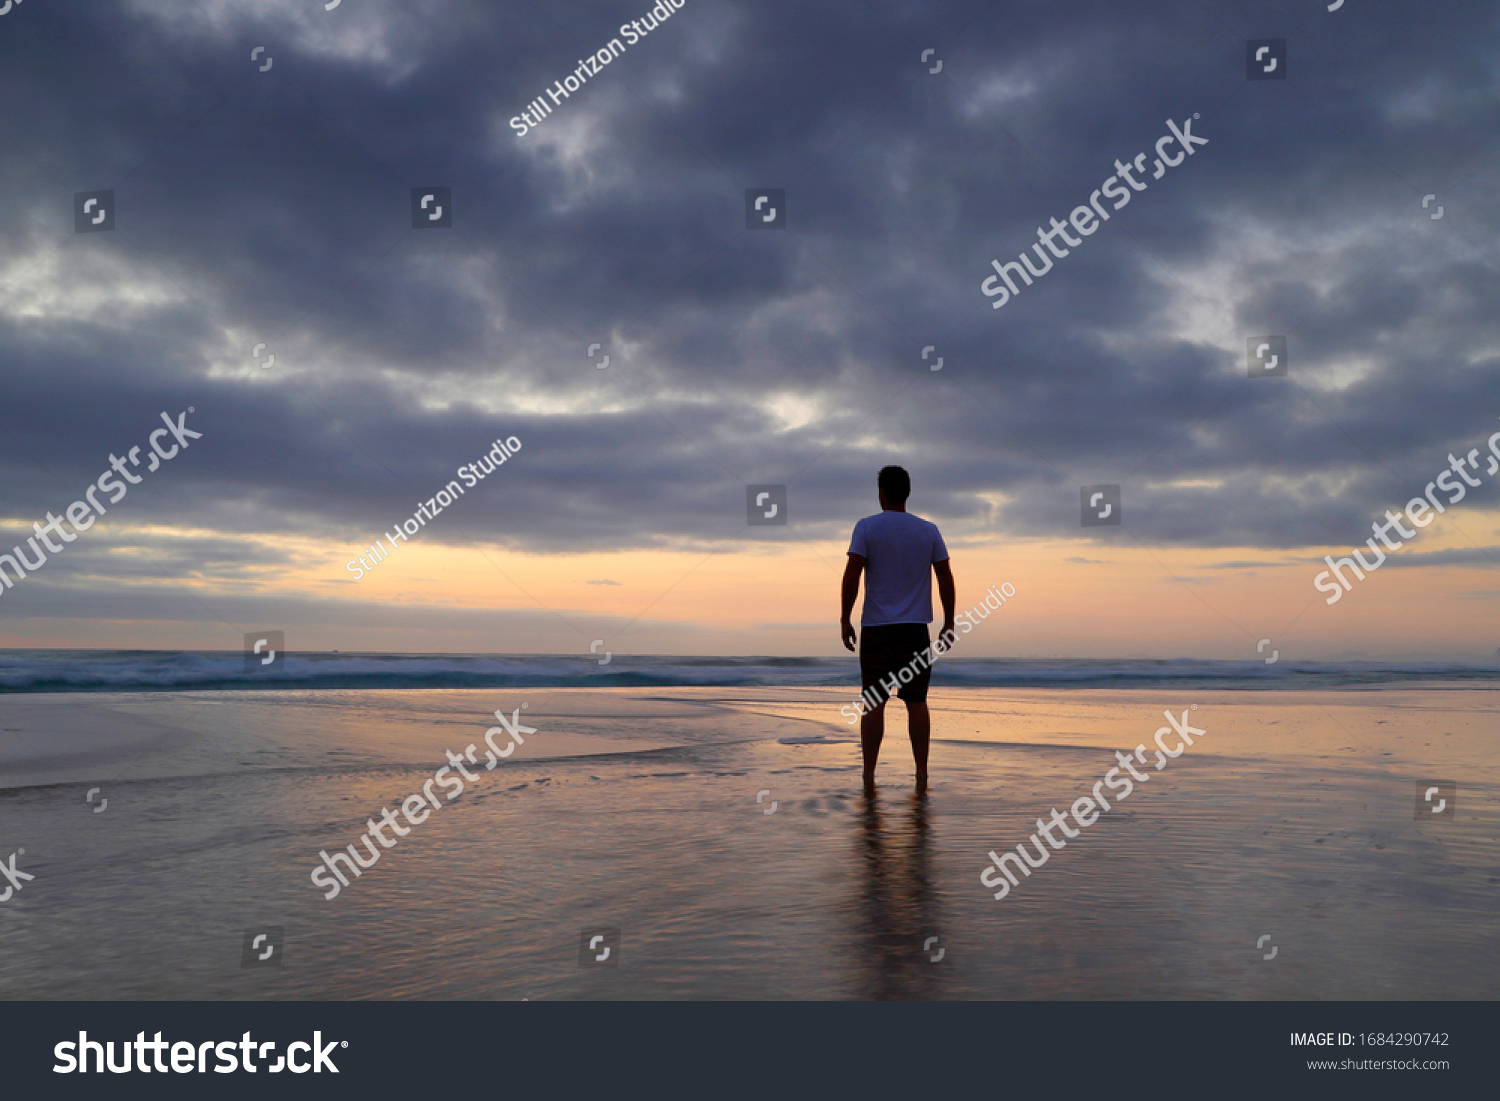 Silhouette of a man standing on the beach on a cloudy morning watching the sunrise. #1684290742